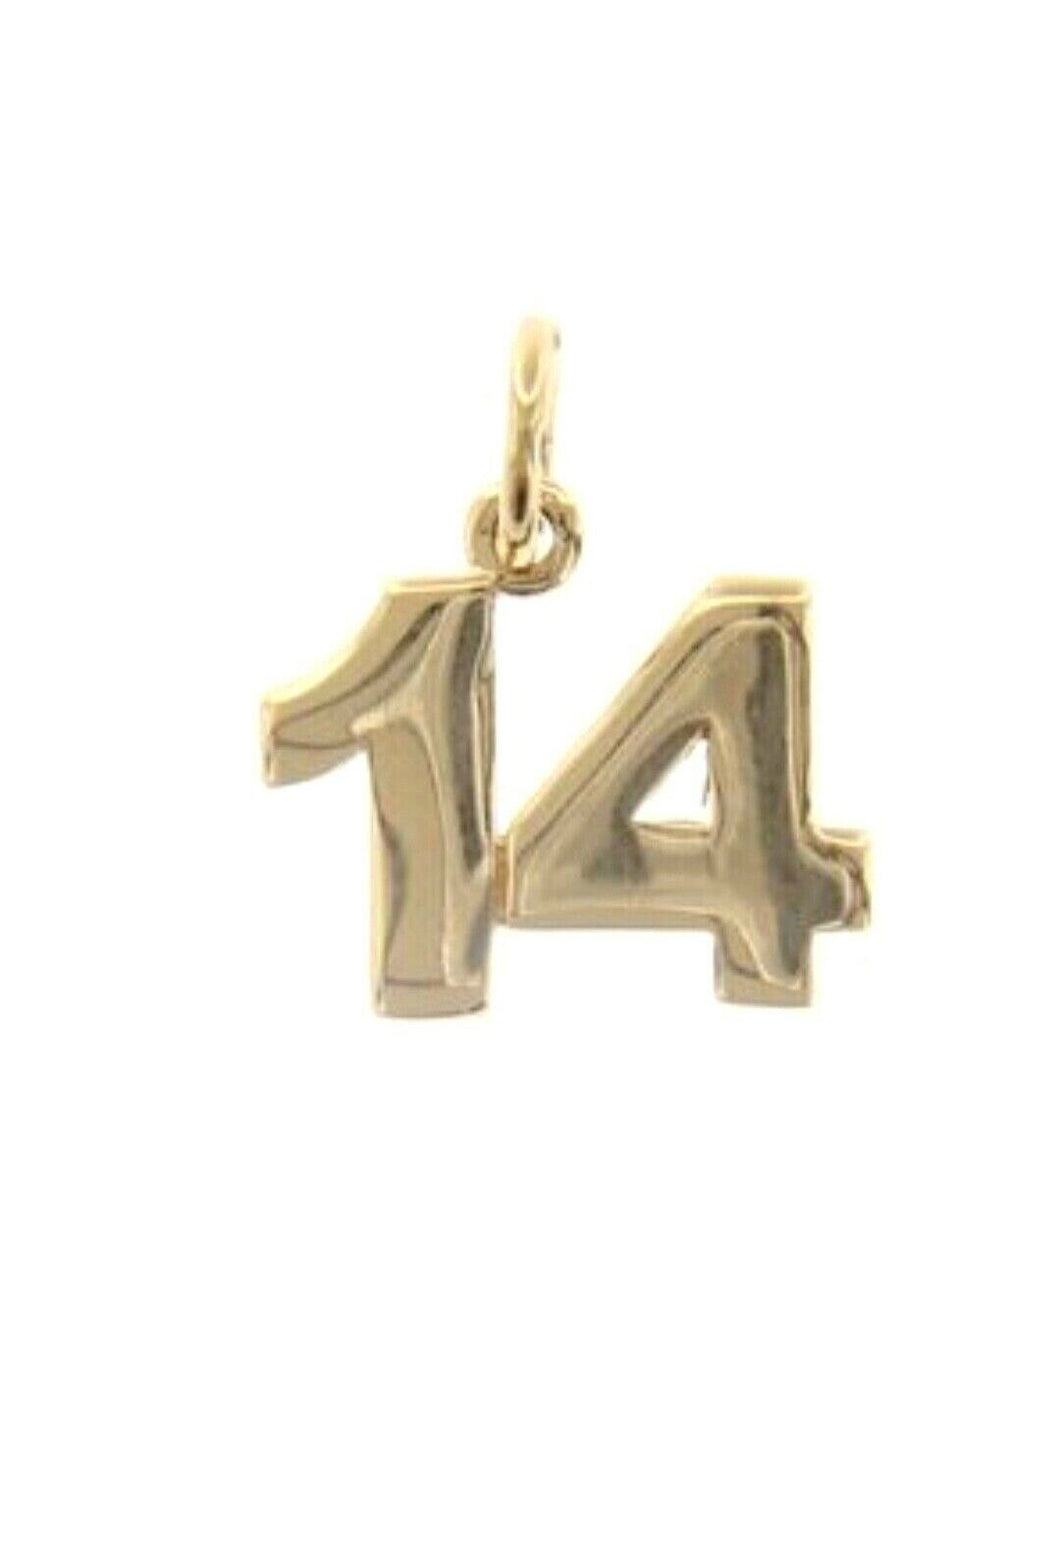 18k yellow gold number 14 fourteen small pendant charm, 0.4